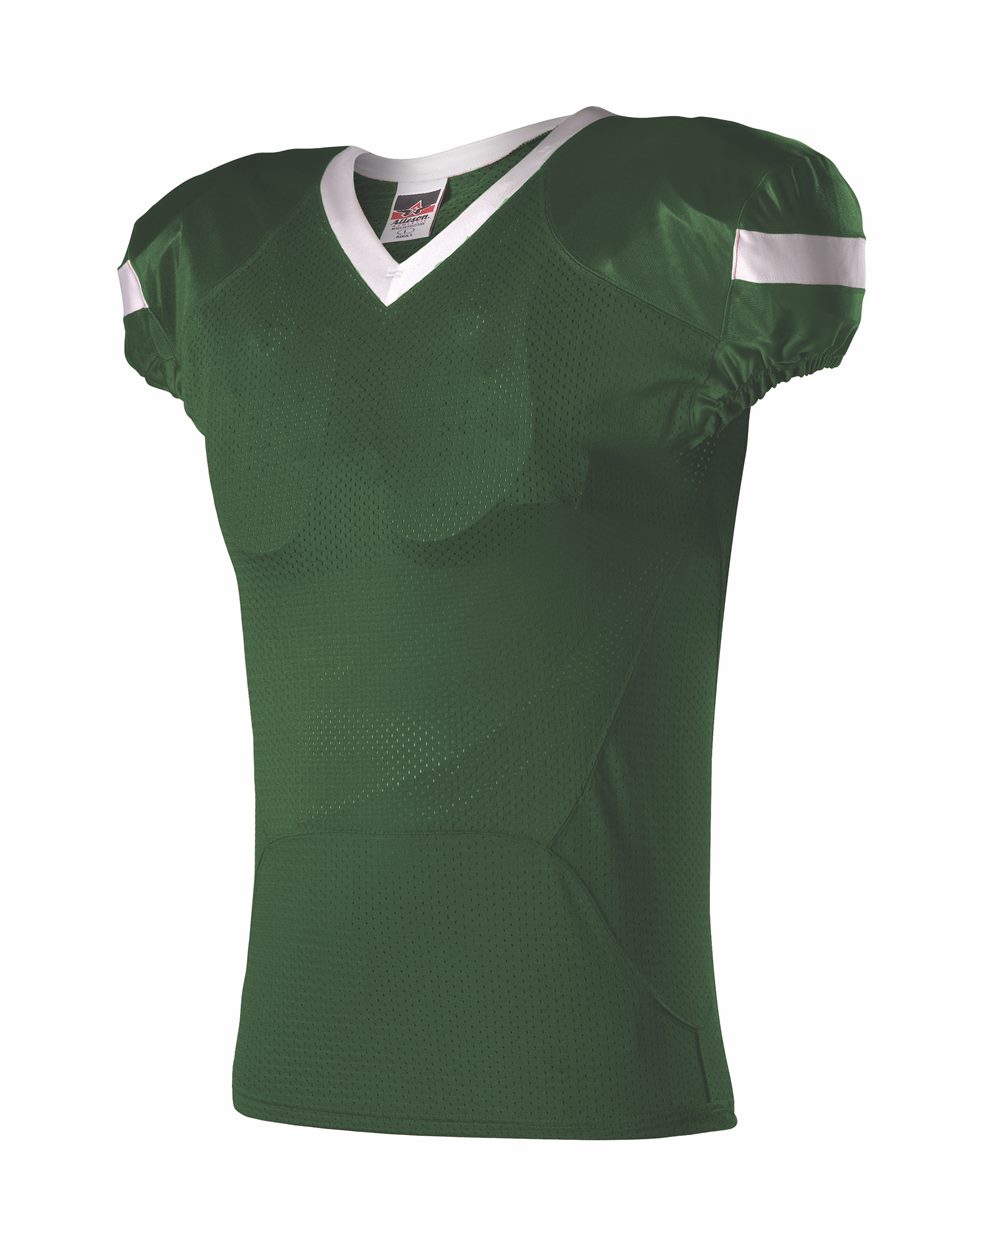 Alleson Athletic Youth Practice Football Jersey